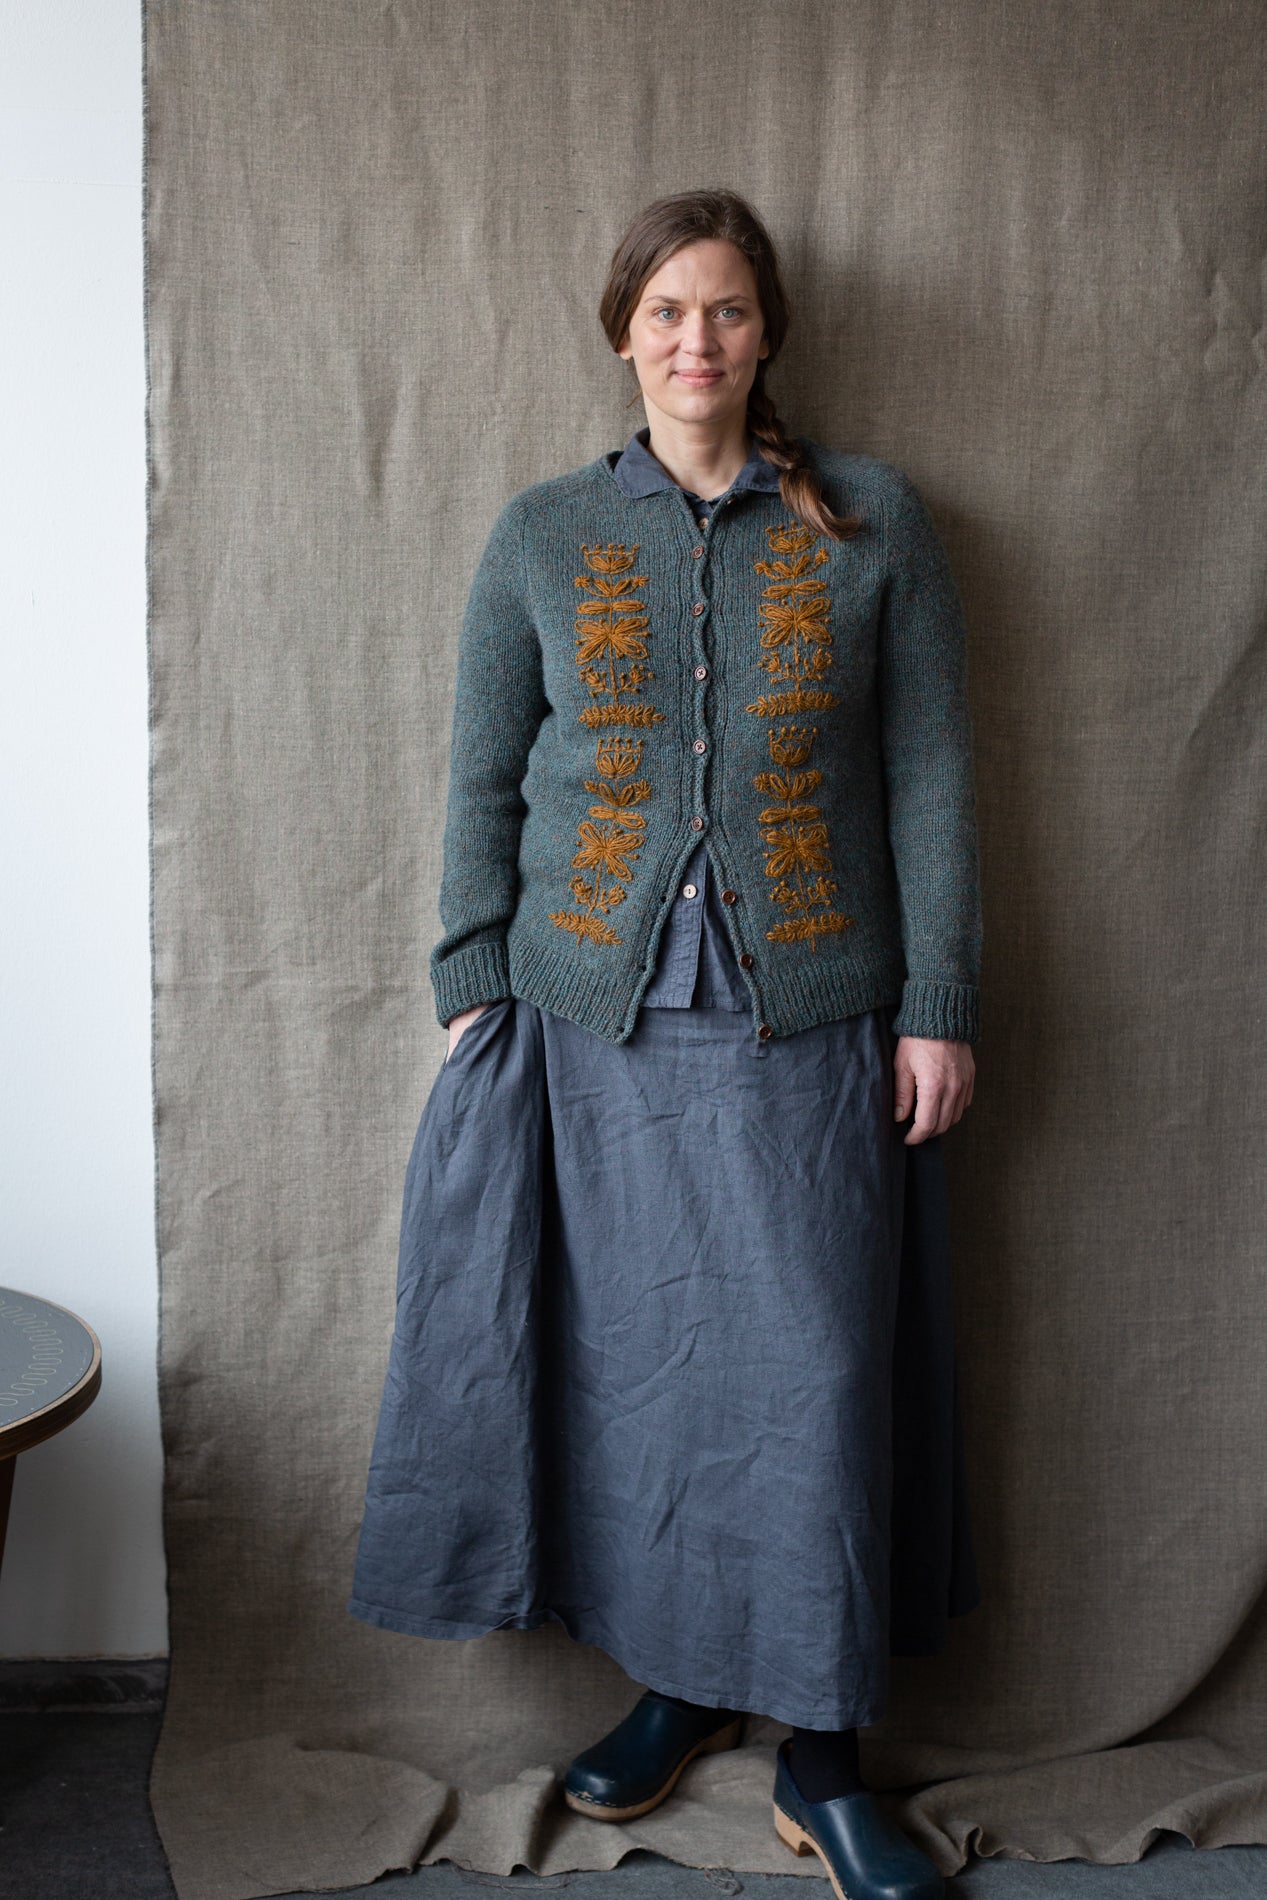 Laine Publishing - Embroidery on Knits by Judit Gummlich